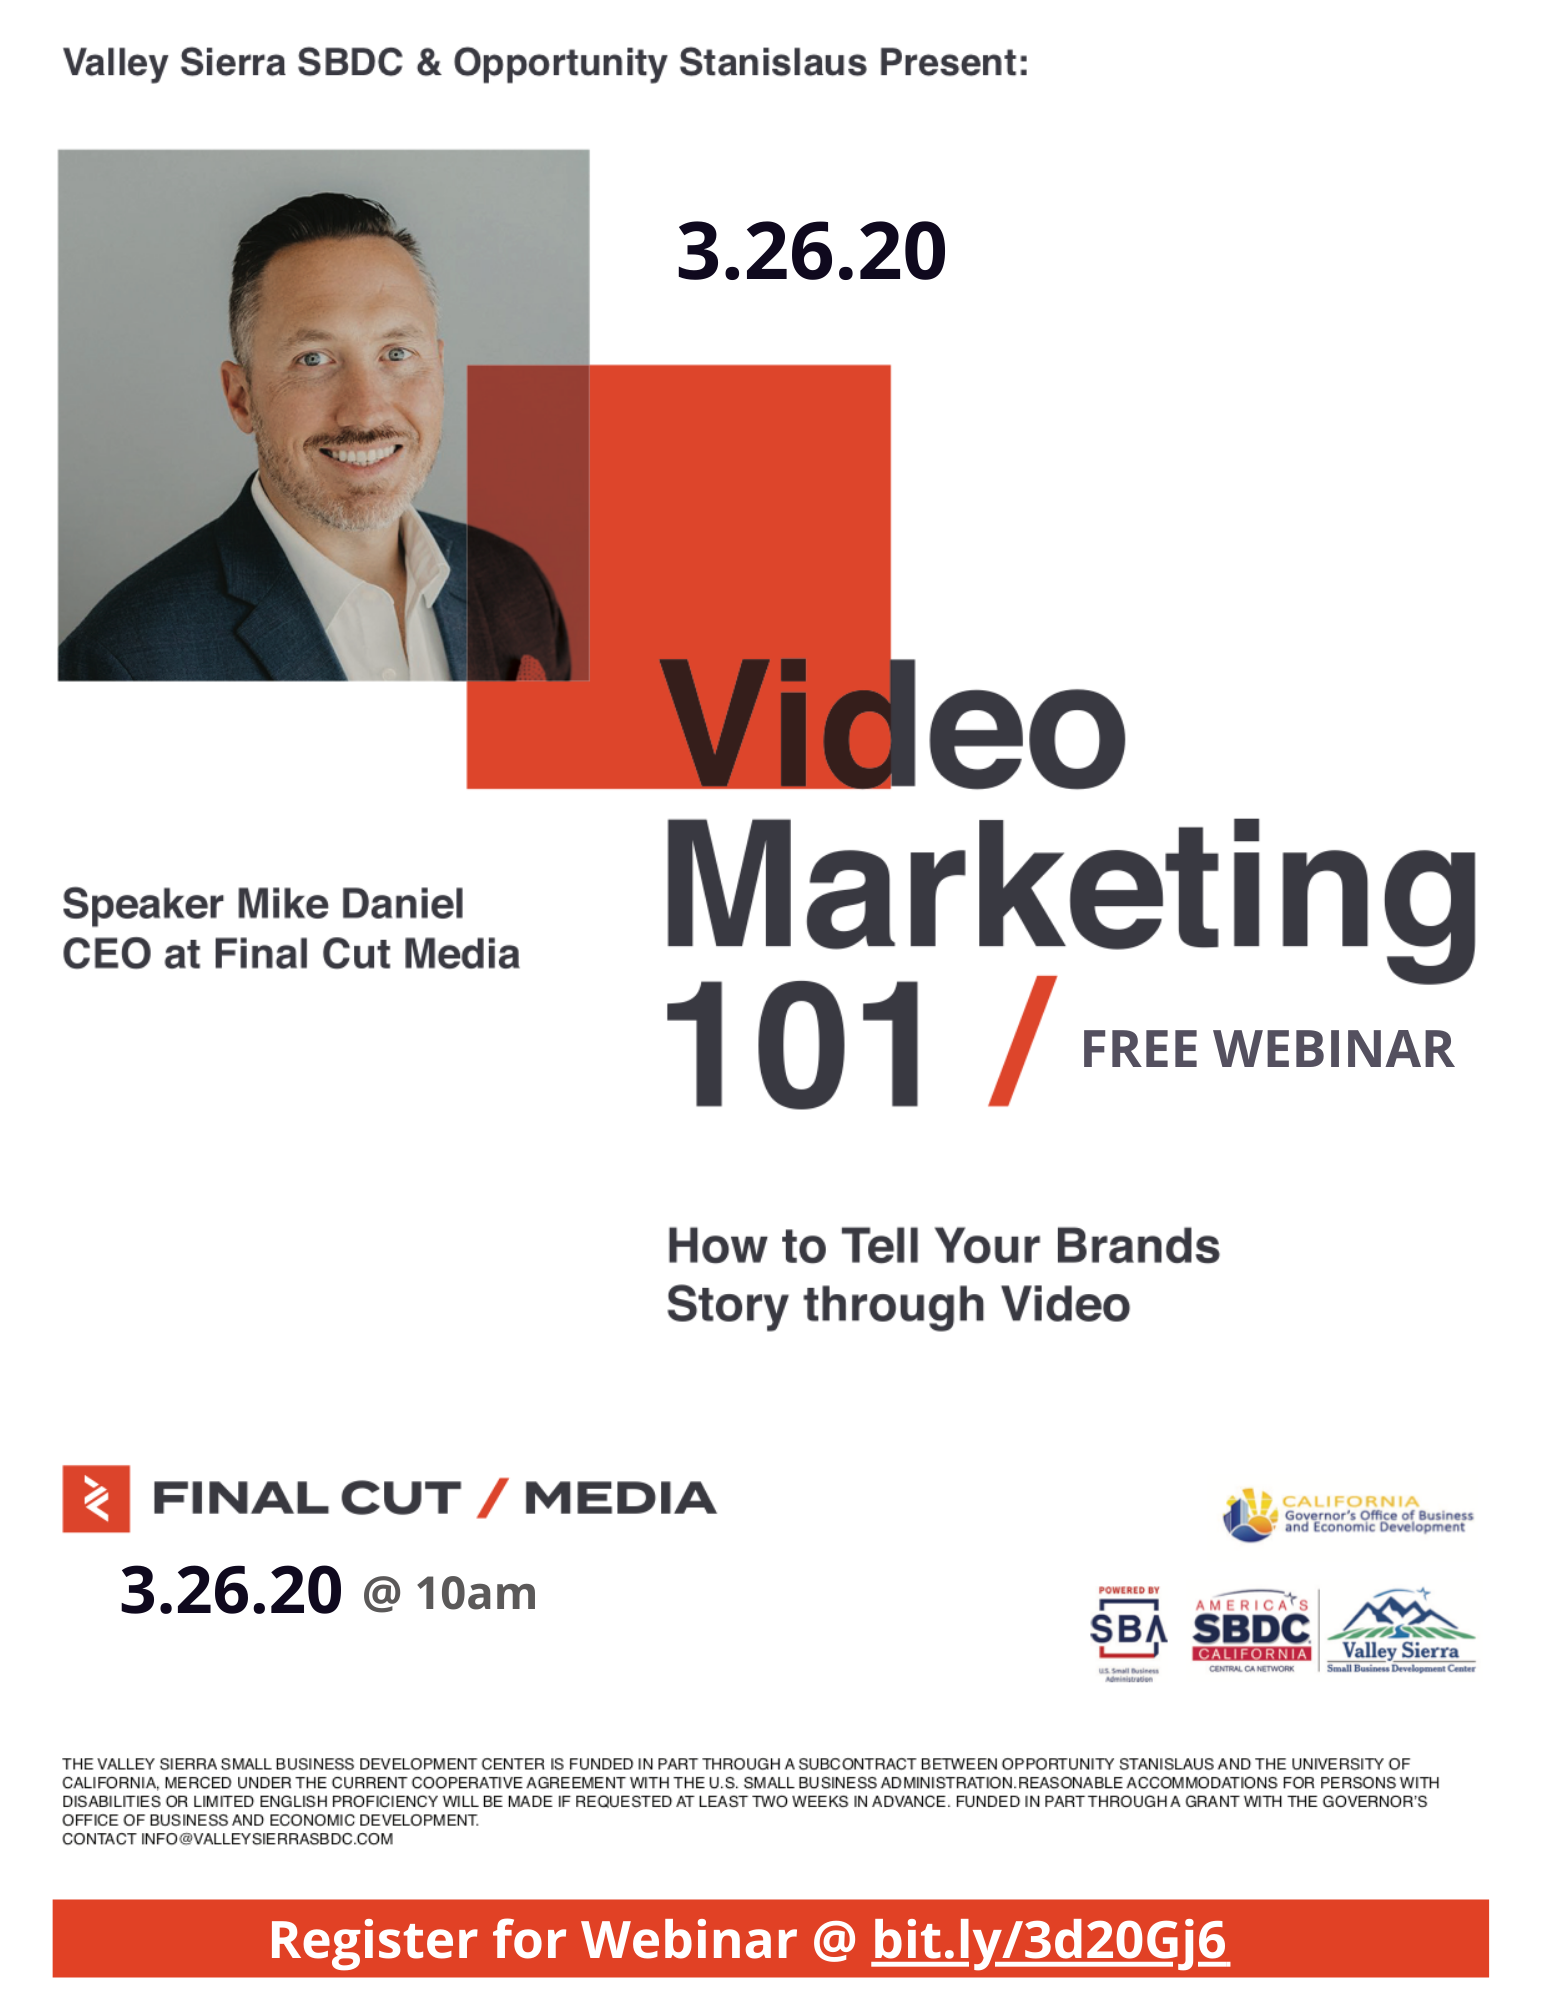 Event Flyer, Changed to Webinar, Video Marketing 101, @ the Valley Sierra SBDC, FREE.